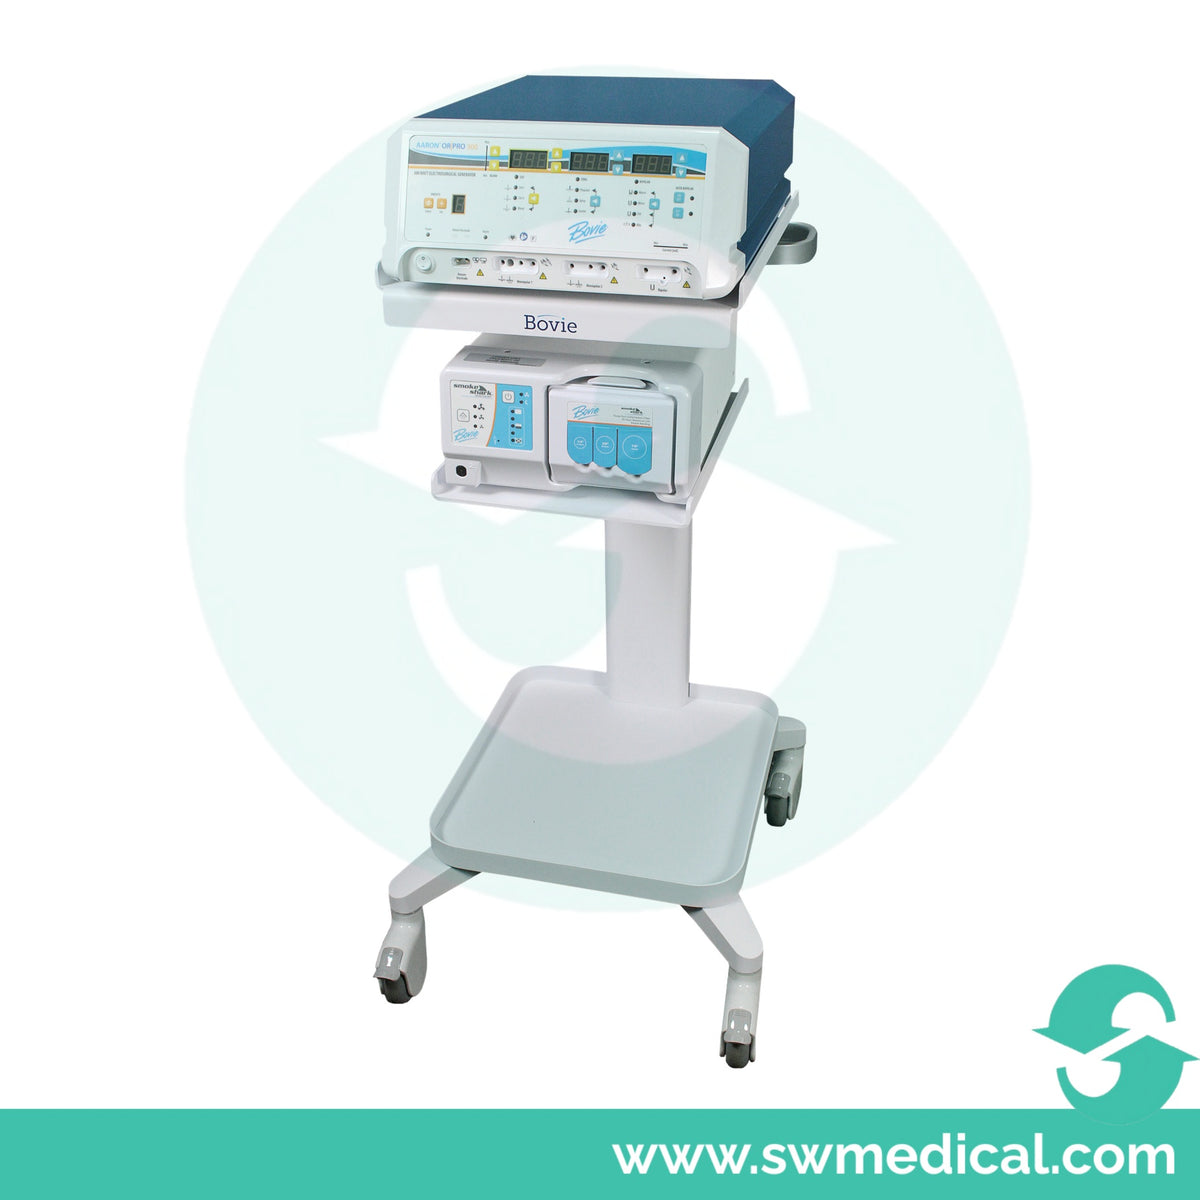 Bovie OR PRO A3350 Electrosurgical Unit On Cart For Sale